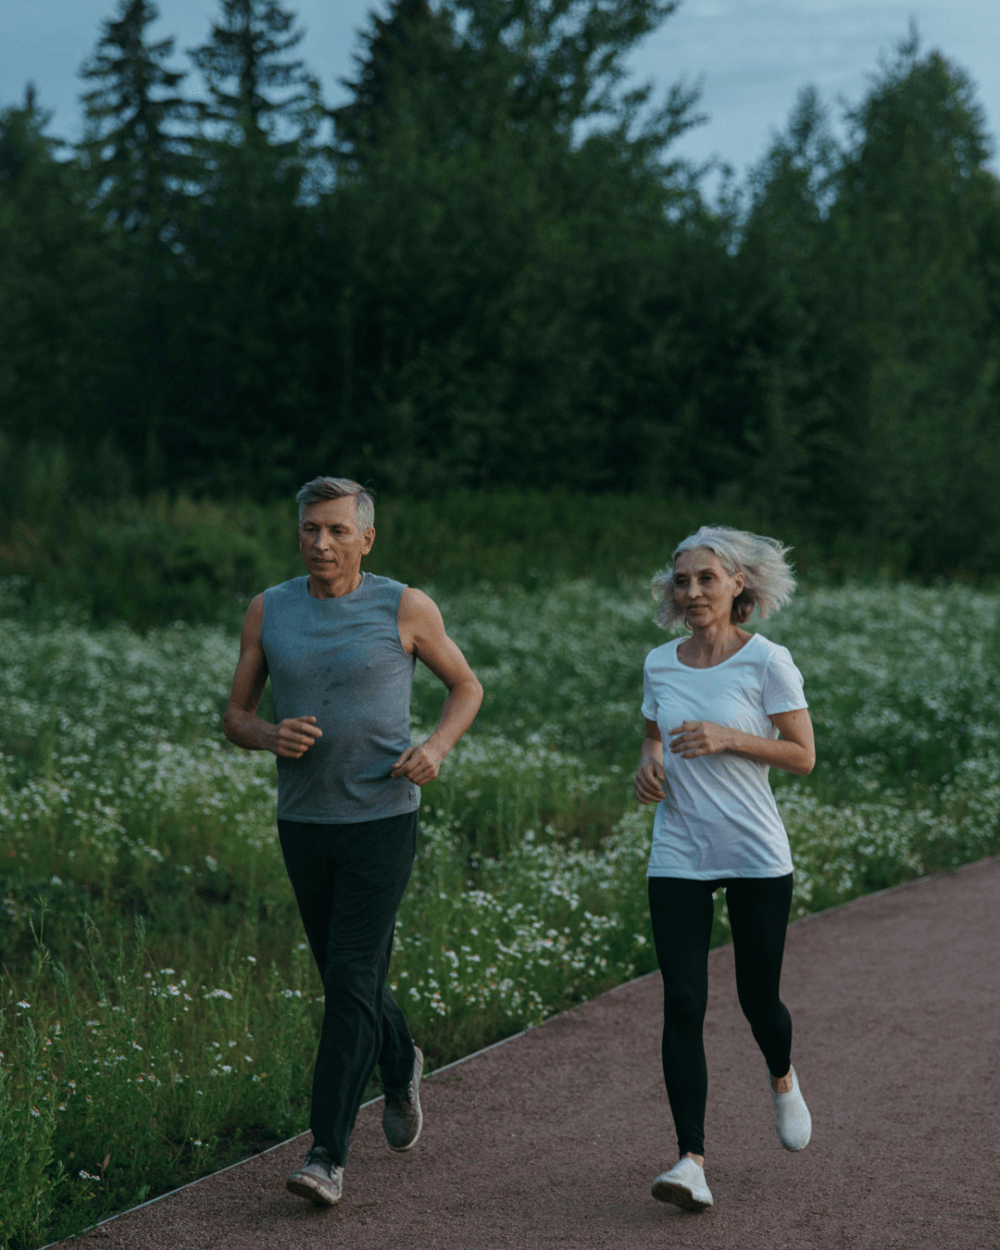 Older man and woman jogging outdoors in the countryside at dusk